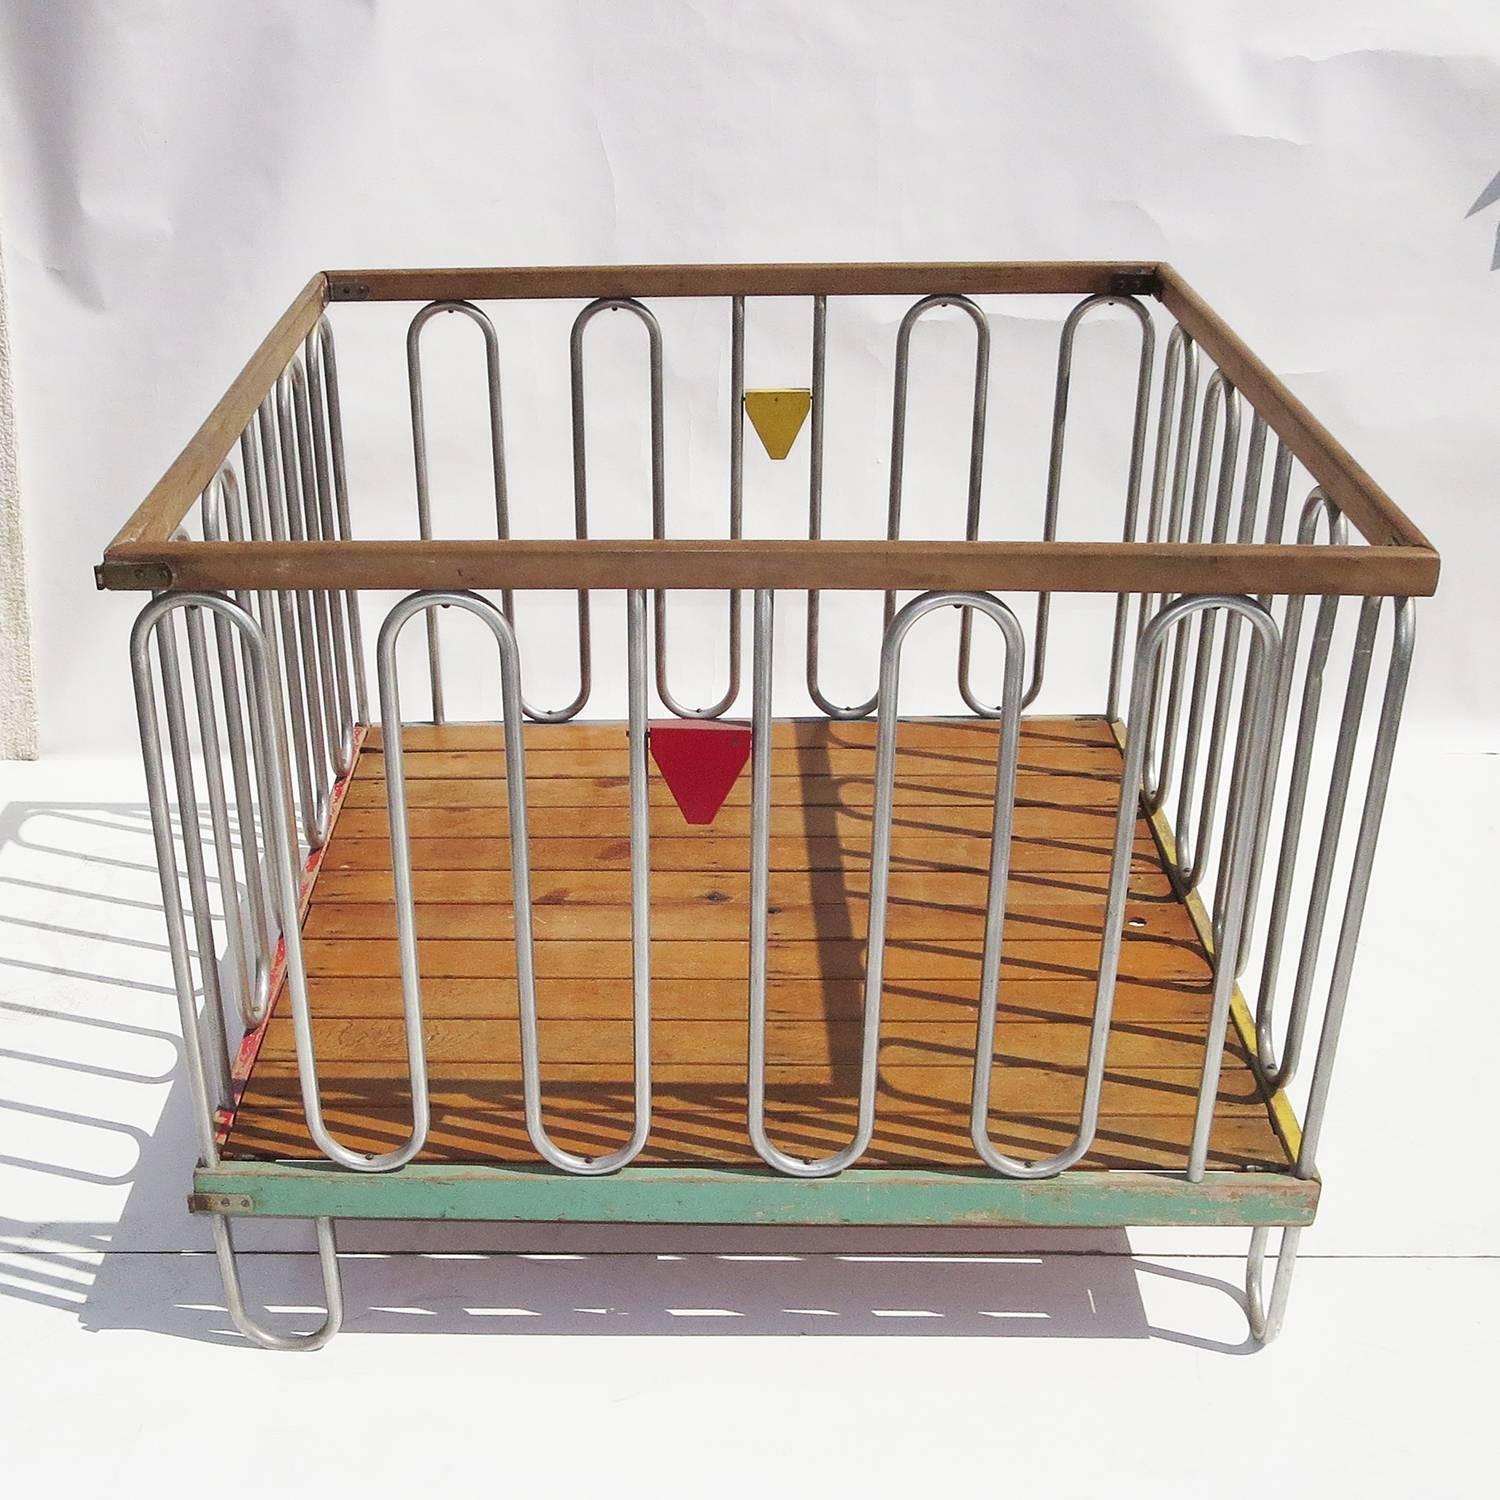 Designed by Gilbert Rohde for the Trimble Nursery and Furniture Company of Rochester, NY, this stylized playpen made its' debut at the Chicago Worlds Fair of 1933. The undulating tubes of aluminum were unlike anything seen in the juvenile furniture